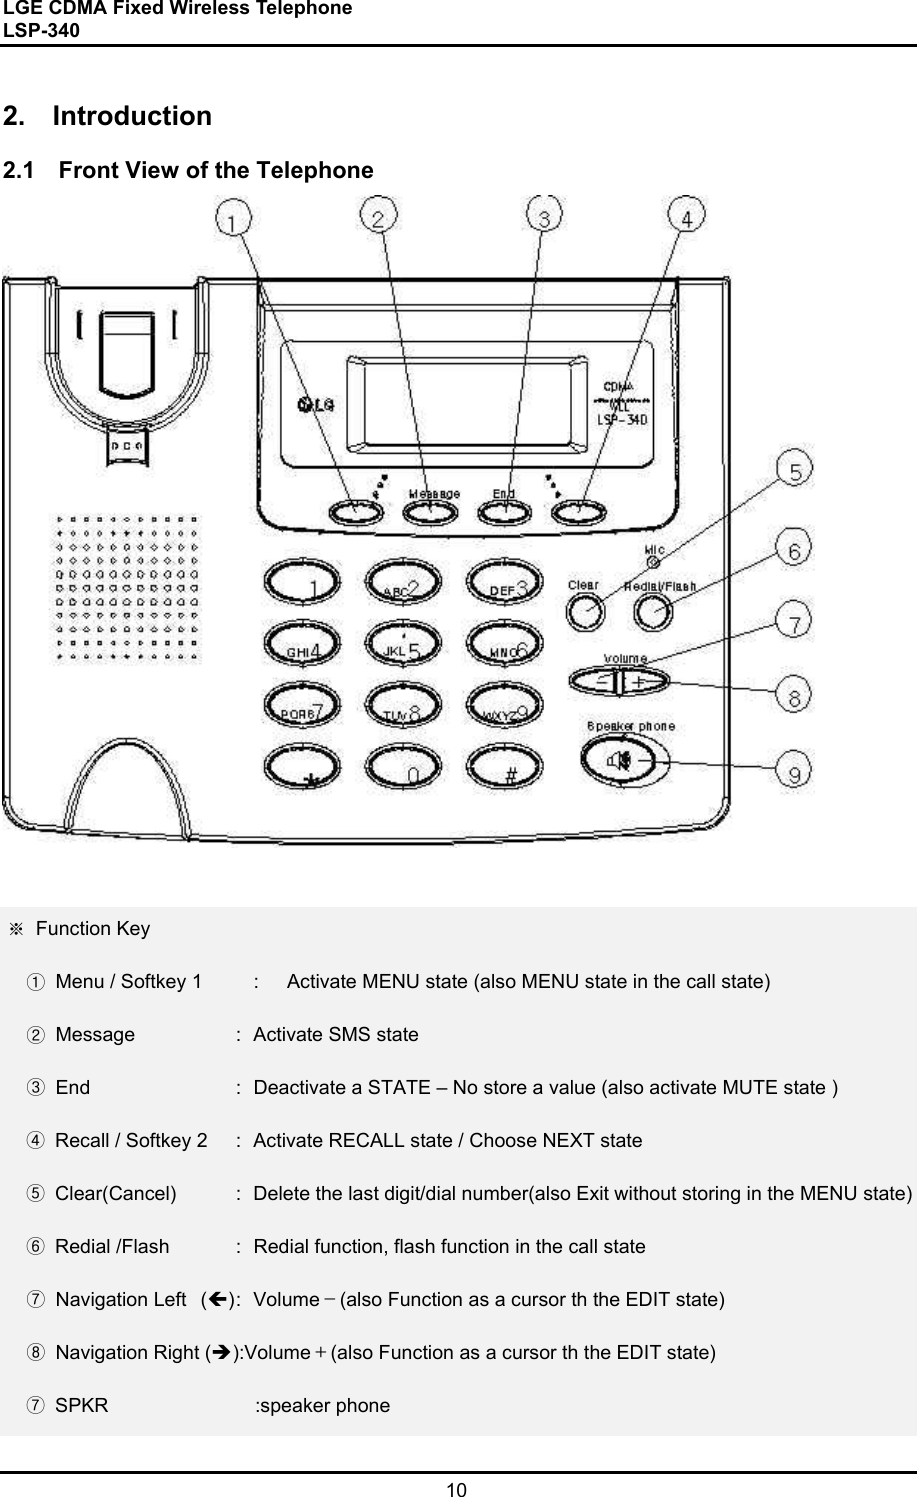 LGE CDMA Fixed Wireless Telephone                                       LSP-340     10   2. Introduction  2.1  Front View of the Telephone    ※ Function Key    ①  Menu / Softkey 1      :  Activate MENU state (also MENU state in the call state)   ② Message     :  Activate SMS state   ③  End      :  Deactivate a STATE – No store a value (also activate MUTE state ) ④  Recall / Softkey 2    :  Activate RECALL state / Choose NEXT state ⑤  Clear(Cancel)      :  Delete the last digit/dial number(also Exit without storing in the MENU state) ⑥  Redial /Flash      :  Redial function, flash function in the call state ⑦ Navigation Left  () :  Volume－(also Function as a cursor th the EDIT state)   ⑧ Navigation Right ():Volume＋(also Function as a cursor th the EDIT state) ⑦ SPKR               :speaker phone 